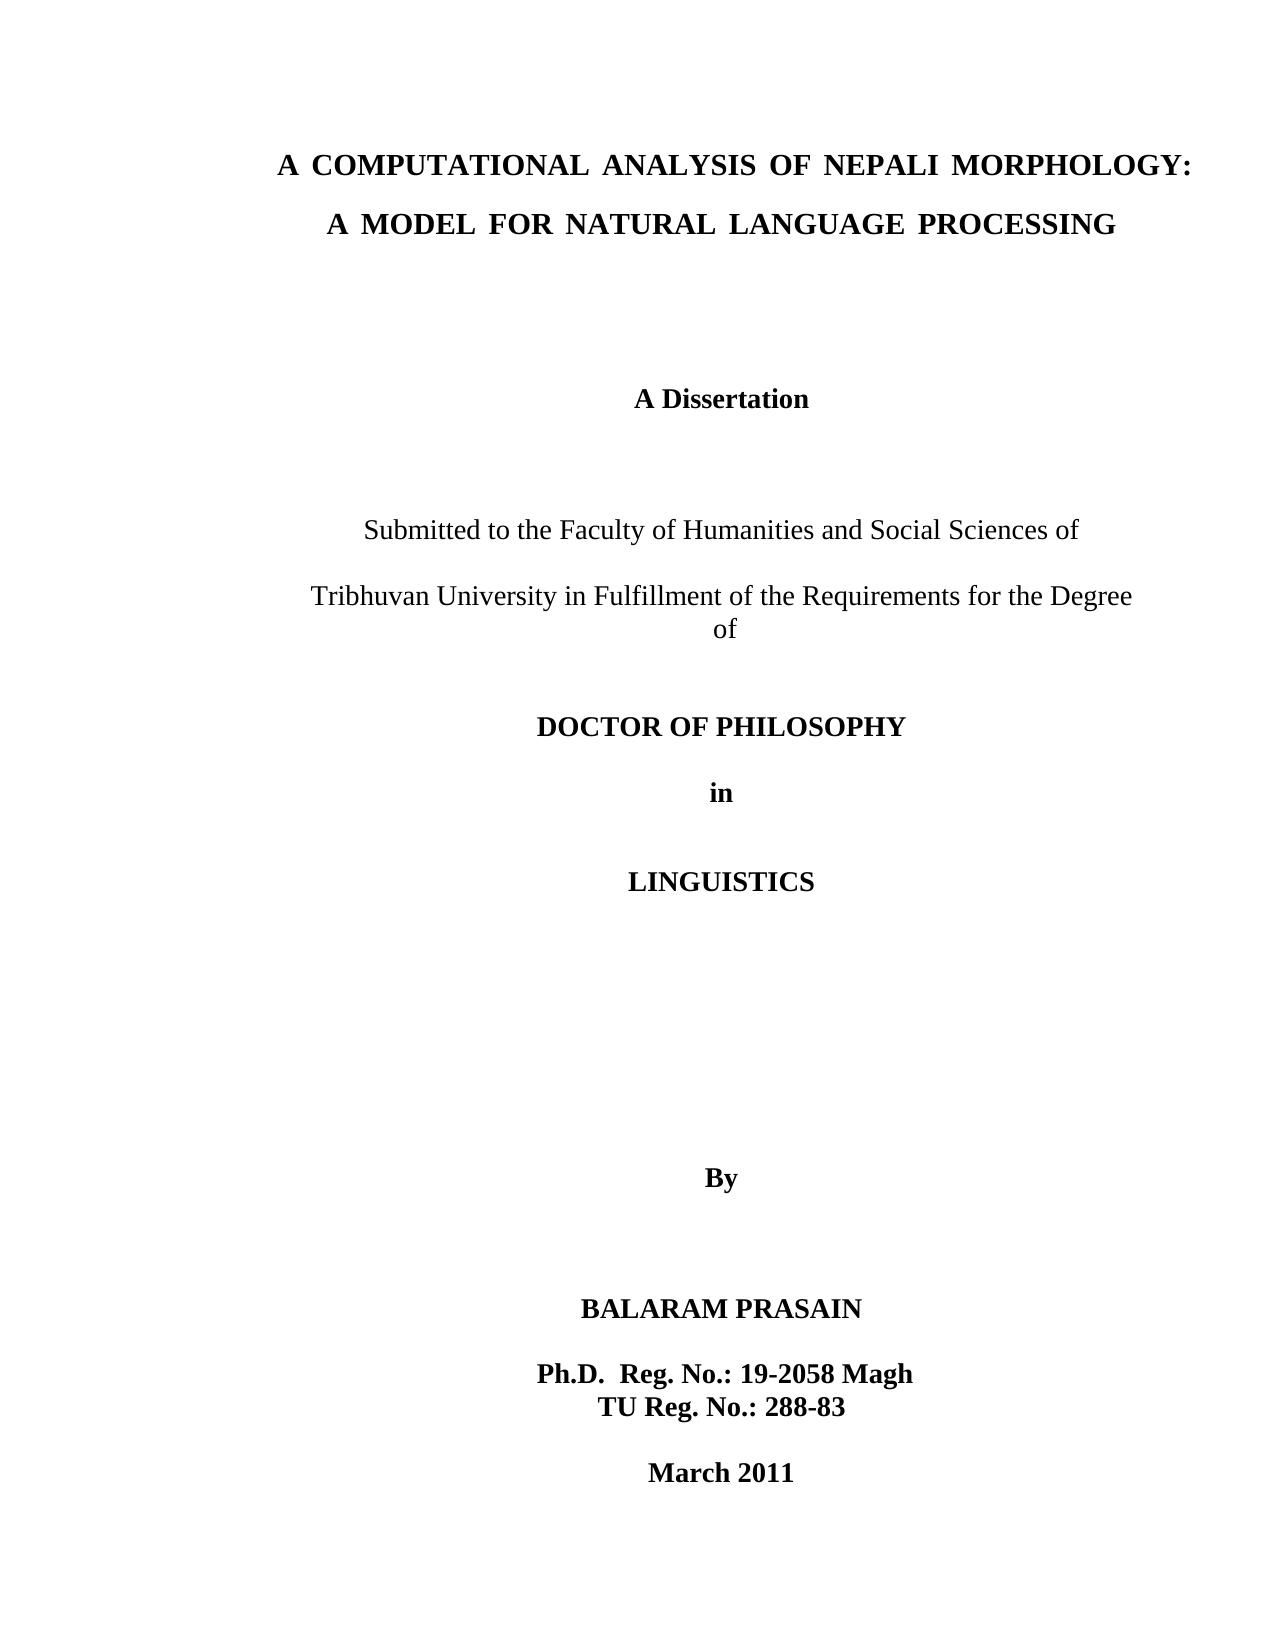 A Computational Analysis of Nepali Morphology: A Model for Natural Language Processing - Dissertation